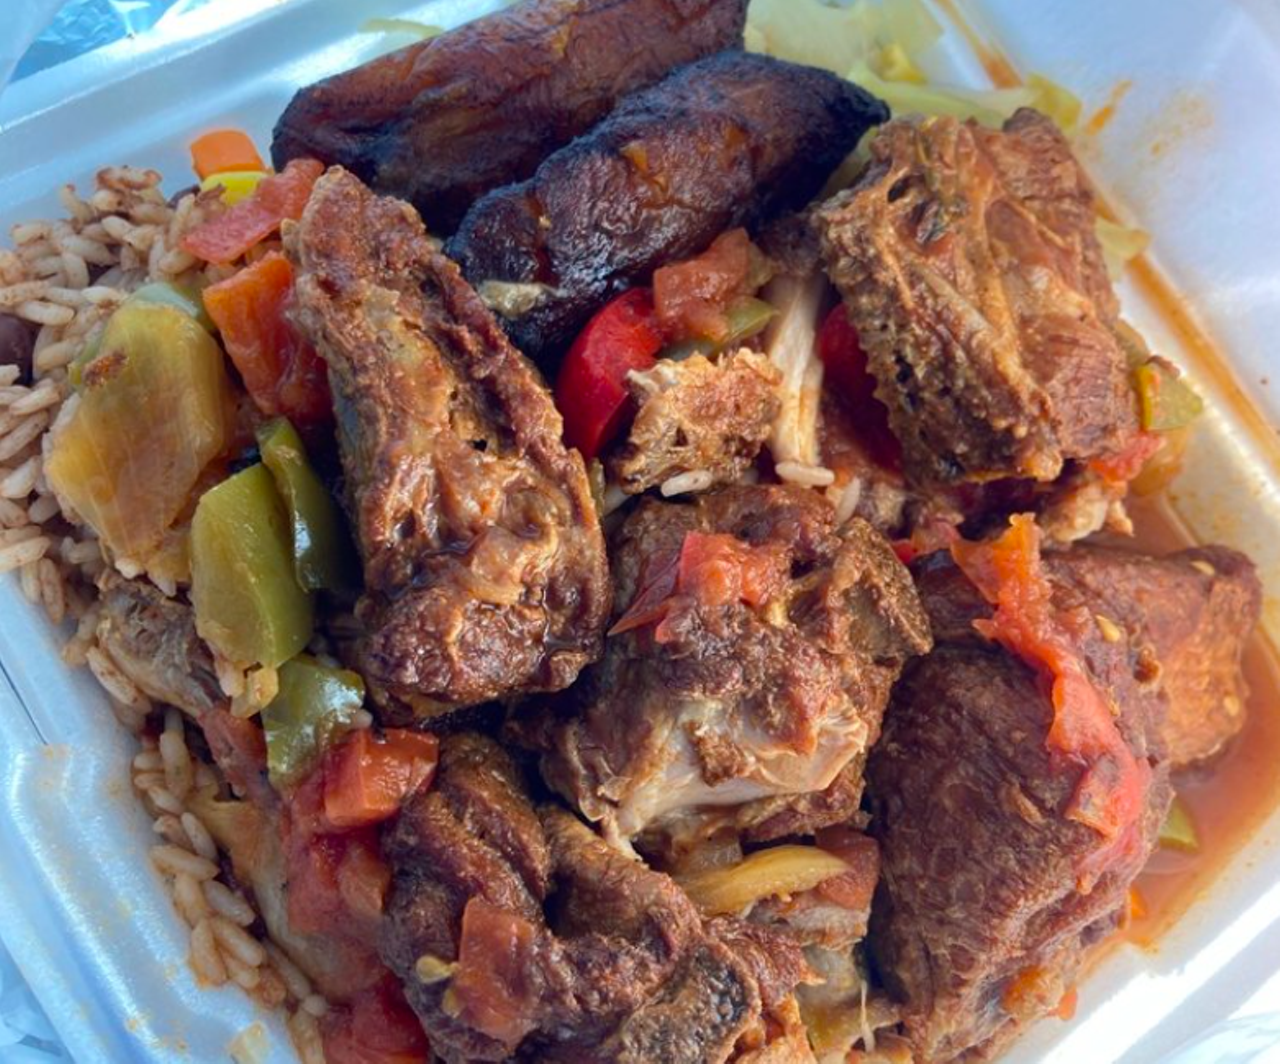 Golden Krust
5510 W. Colonial Drive, Orlando
Sharing the taste of the Caribbean since 1989.